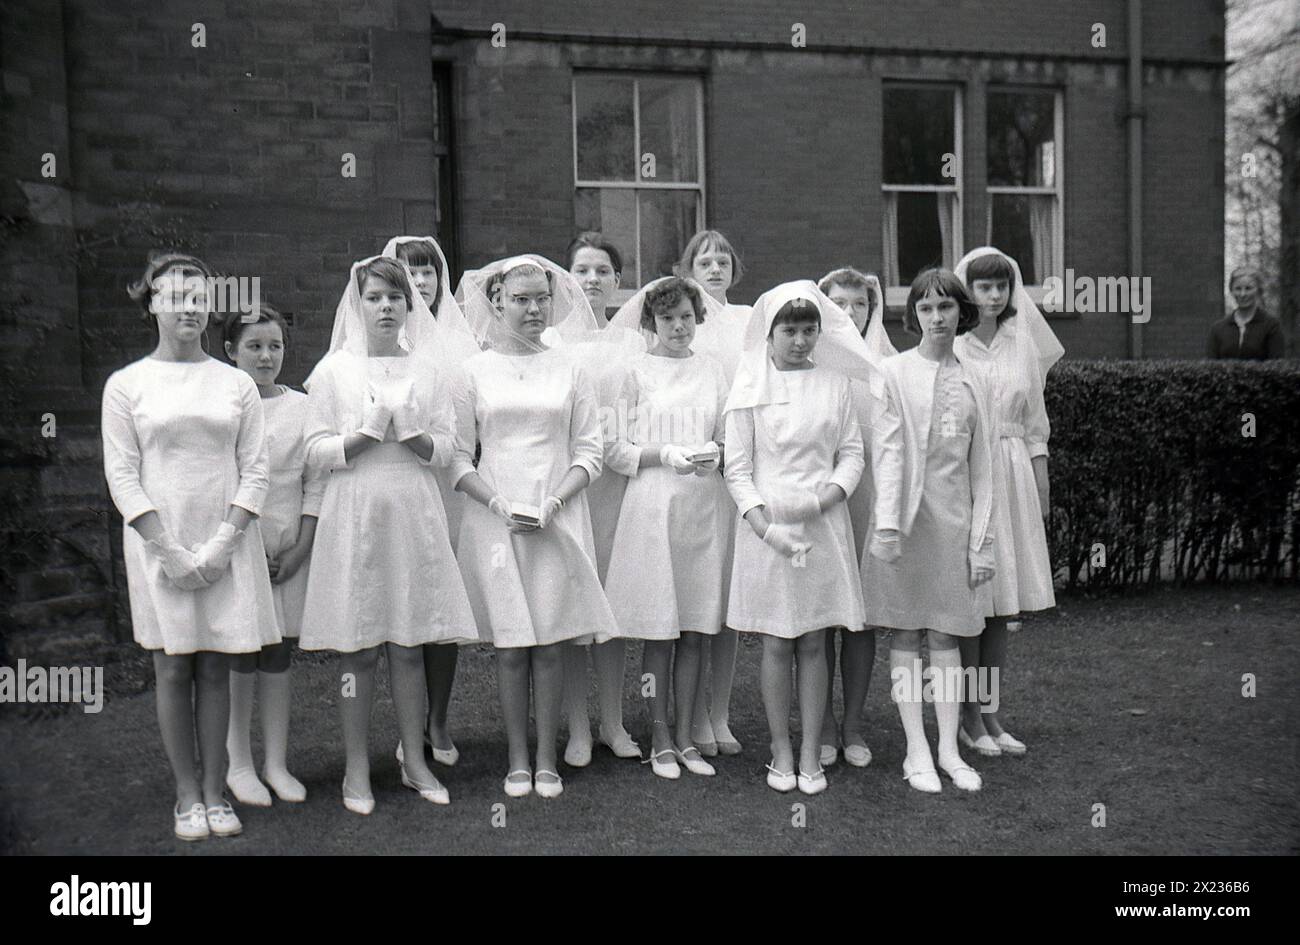 1970s, historical, catholic schoolgirls wearing white dresses and hair veils, standing for a photo after having their first holy communion, England, UK. Stock Photo